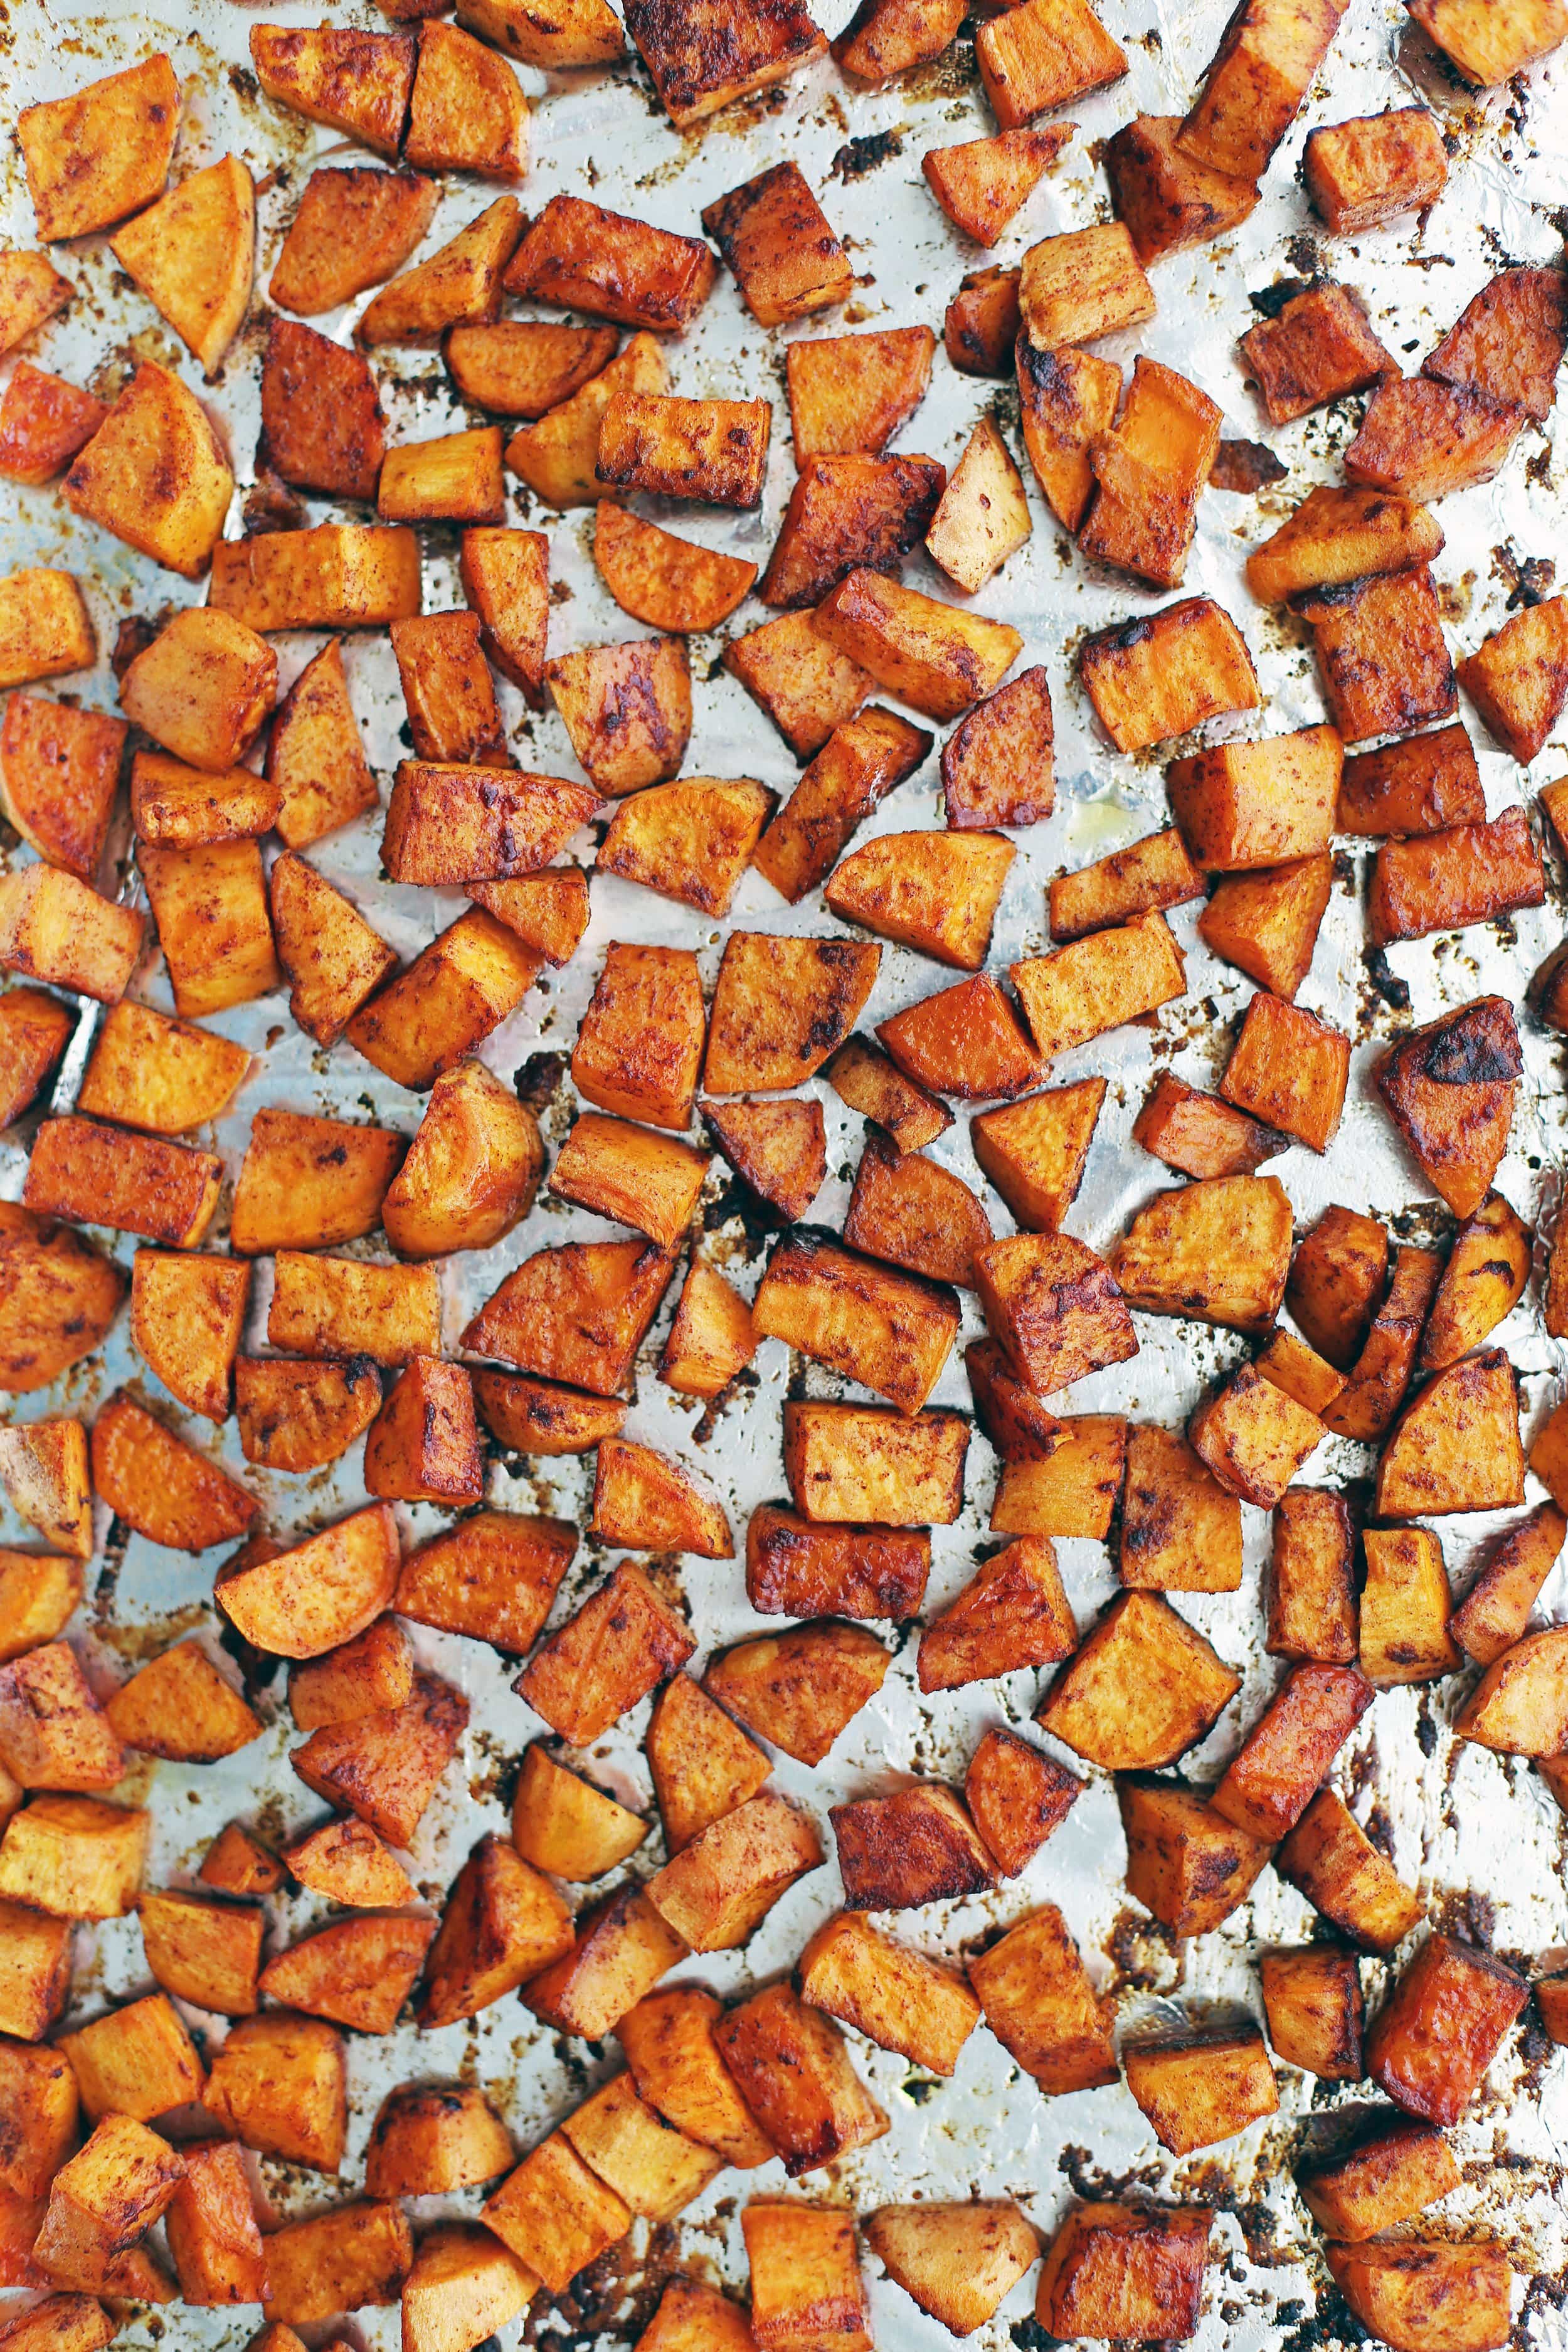 Roasted maple cinnamon sweet potato pieces in a single layer on a baking sheet.